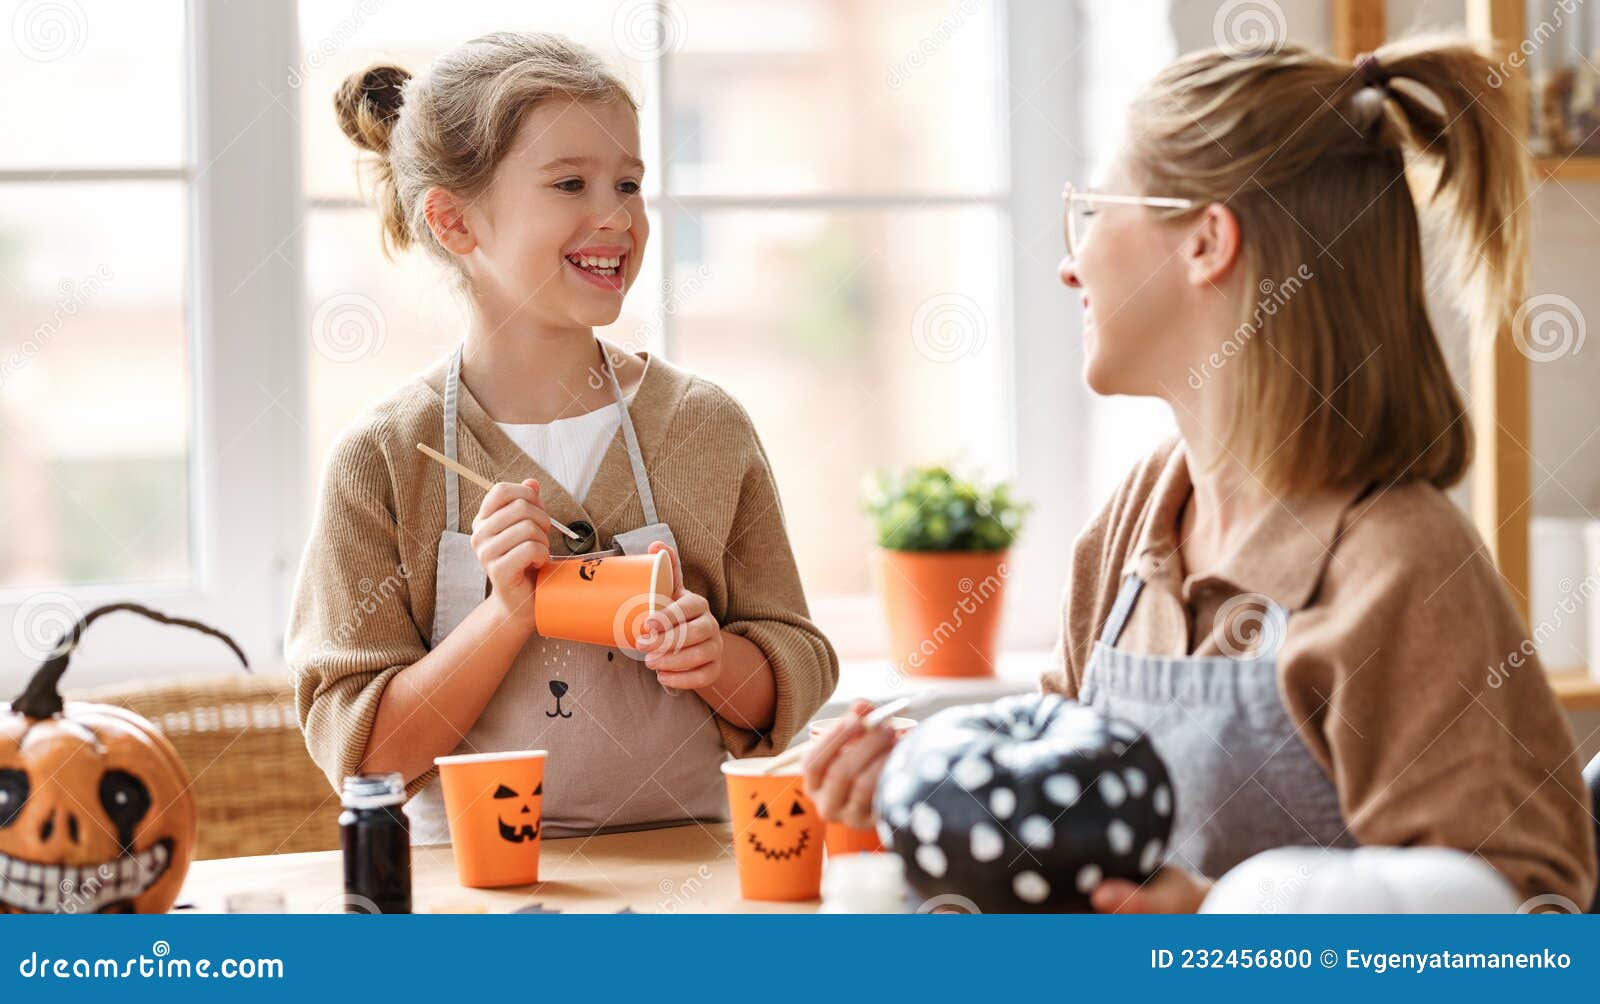 Smiling Mother and Daughter Sitting at Wooden Table and Making ...